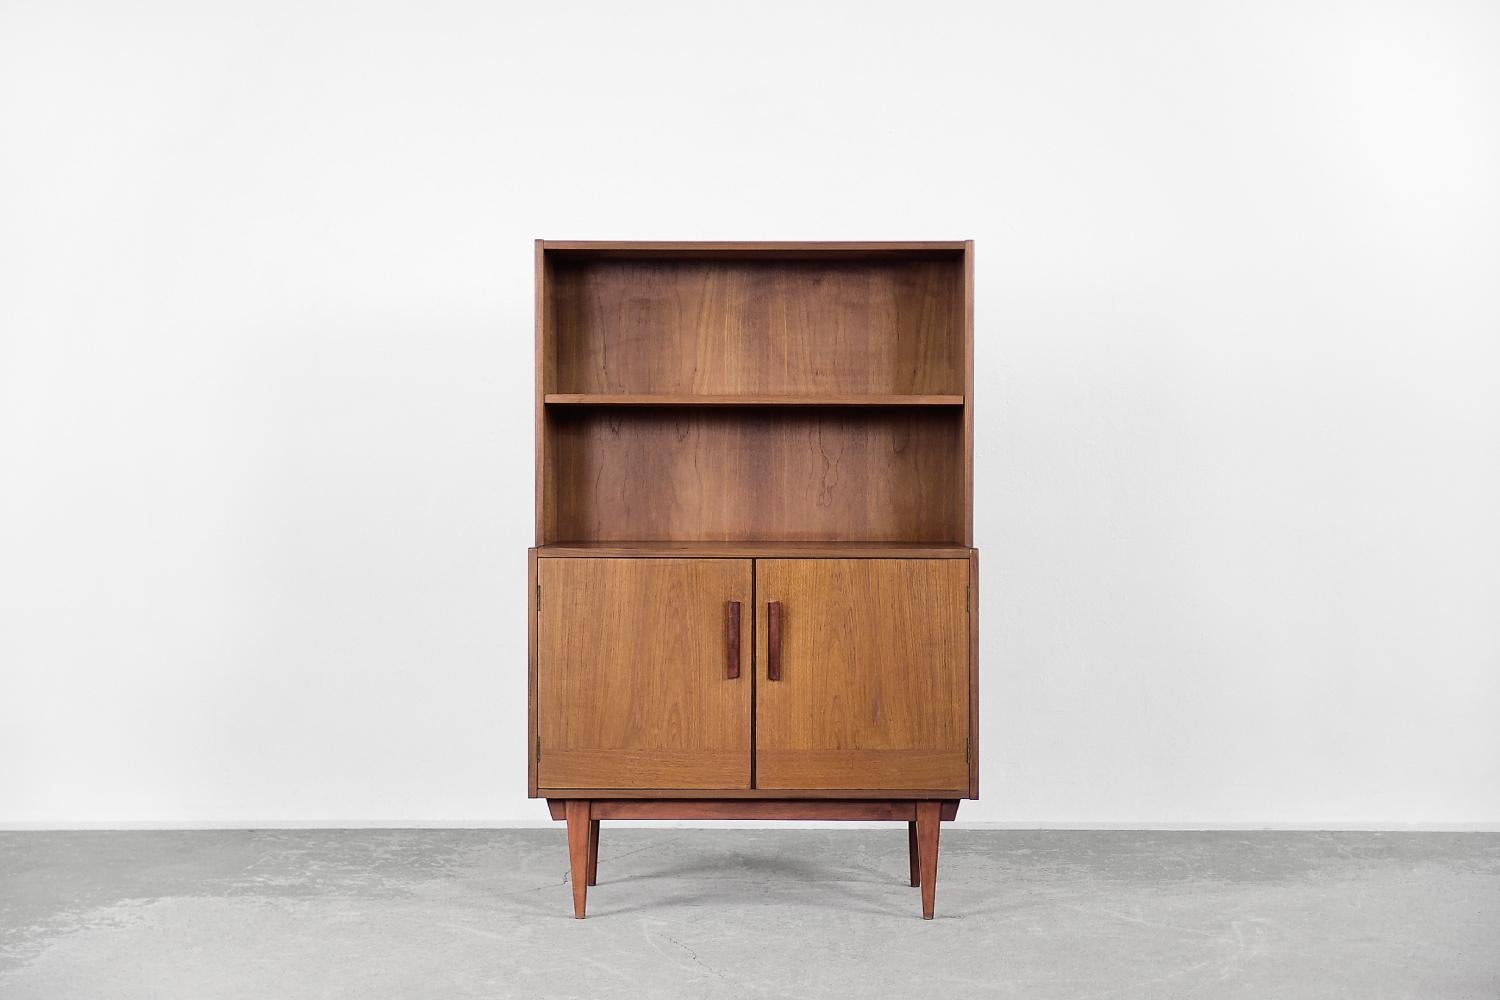 This classic cabinet was made in Sweden during the 1960s. It is finished with teak wood in a warm shade of brown. The cabinet has two shelves and the locker below. The oblong handles are made of teak. The piece of furniture is mounted on a wooden